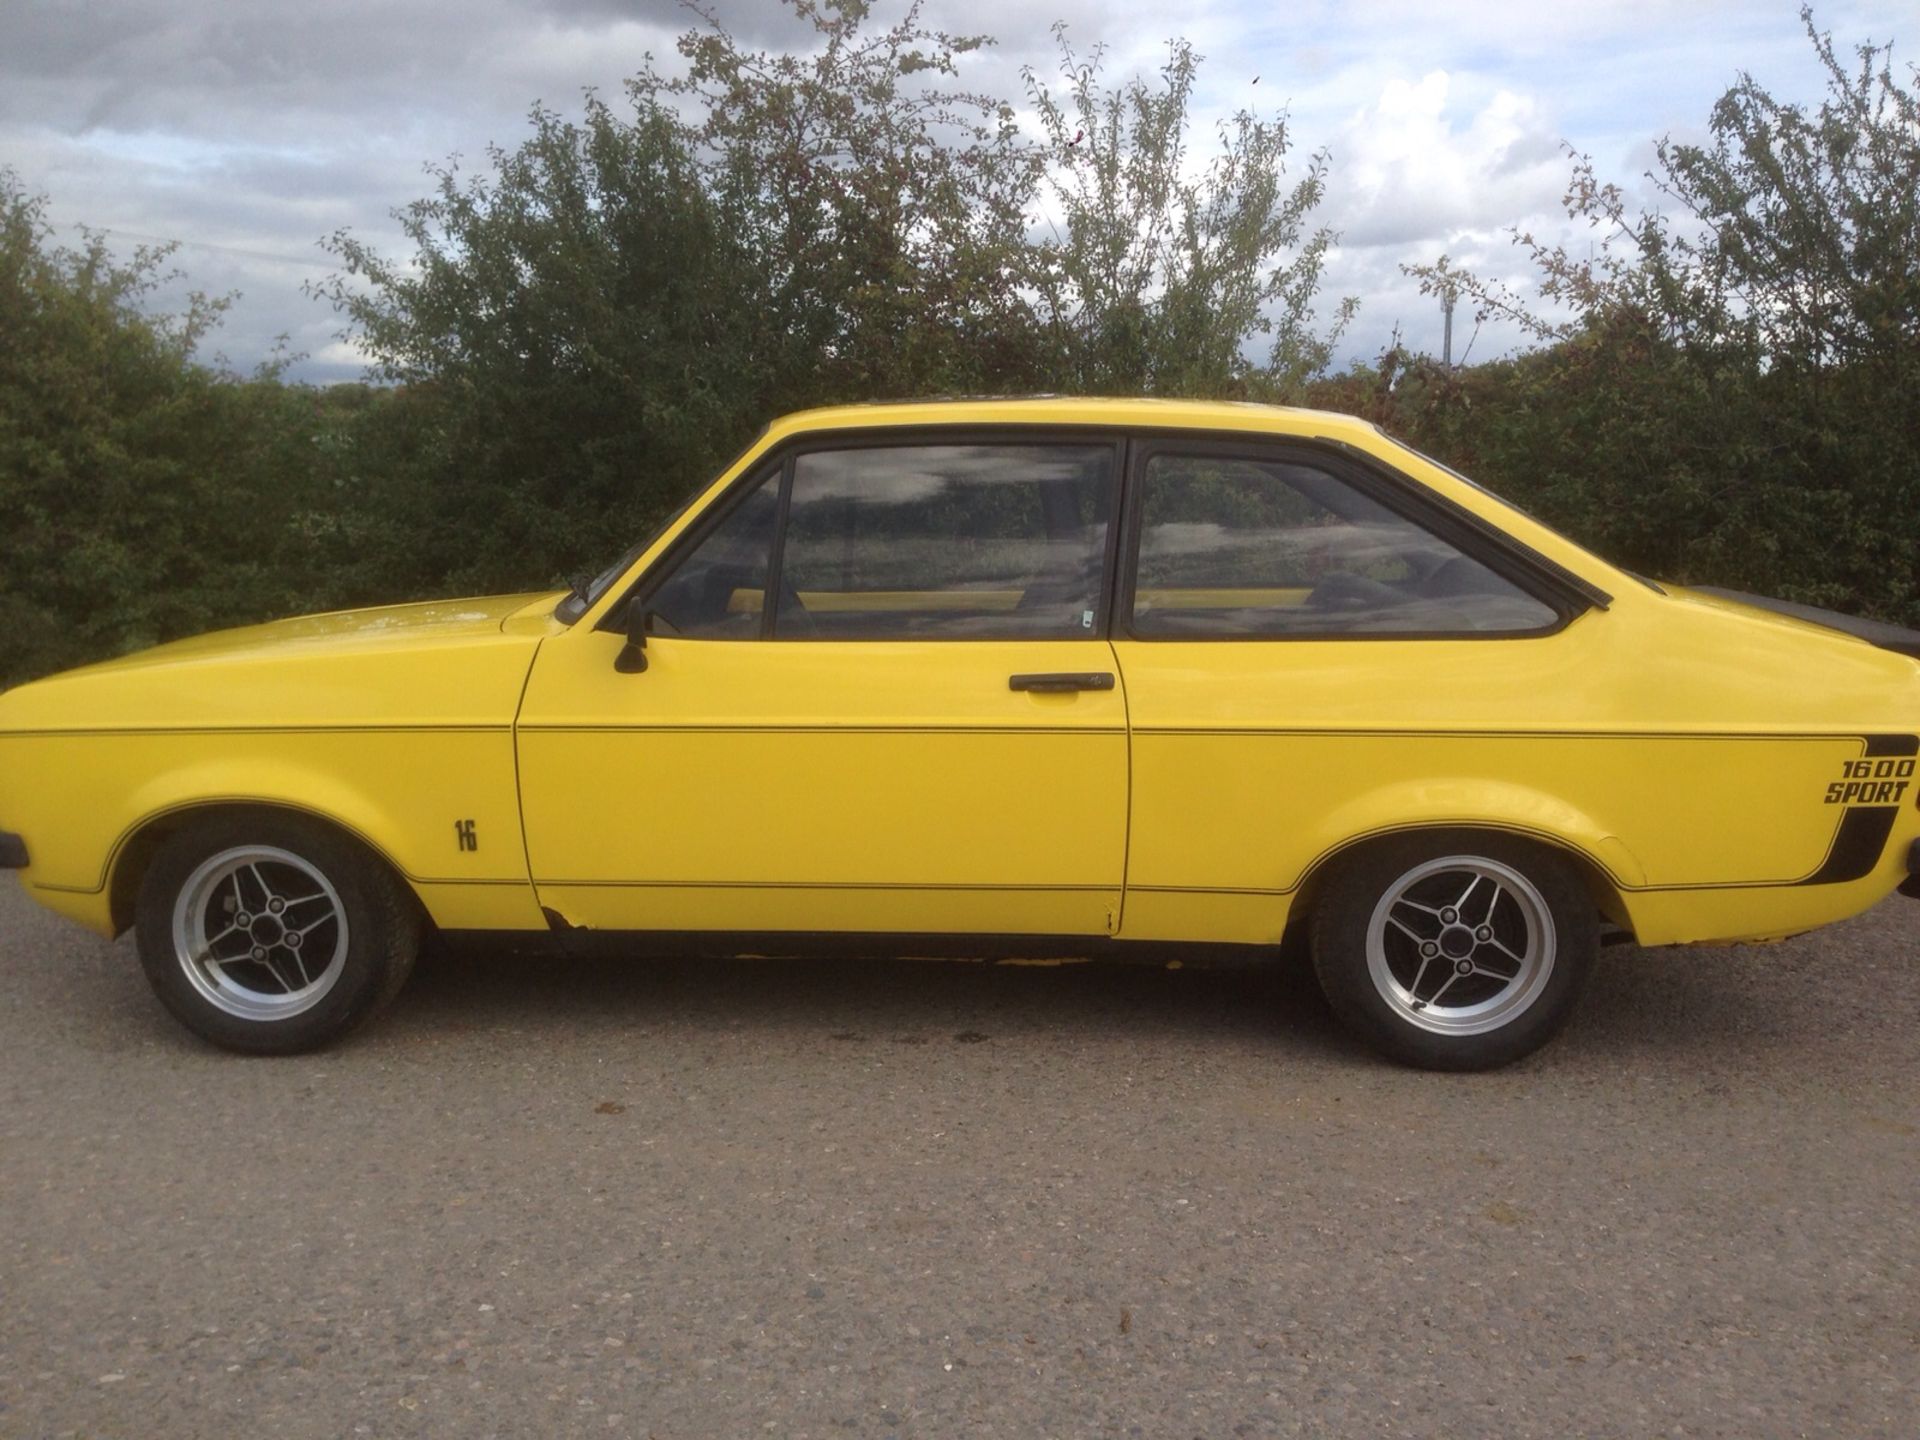 1979/T Ford Escort mk2 1600 Sport - in Signal yellow -  UK car  (545 miles) since rebuild - Image 4 of 54